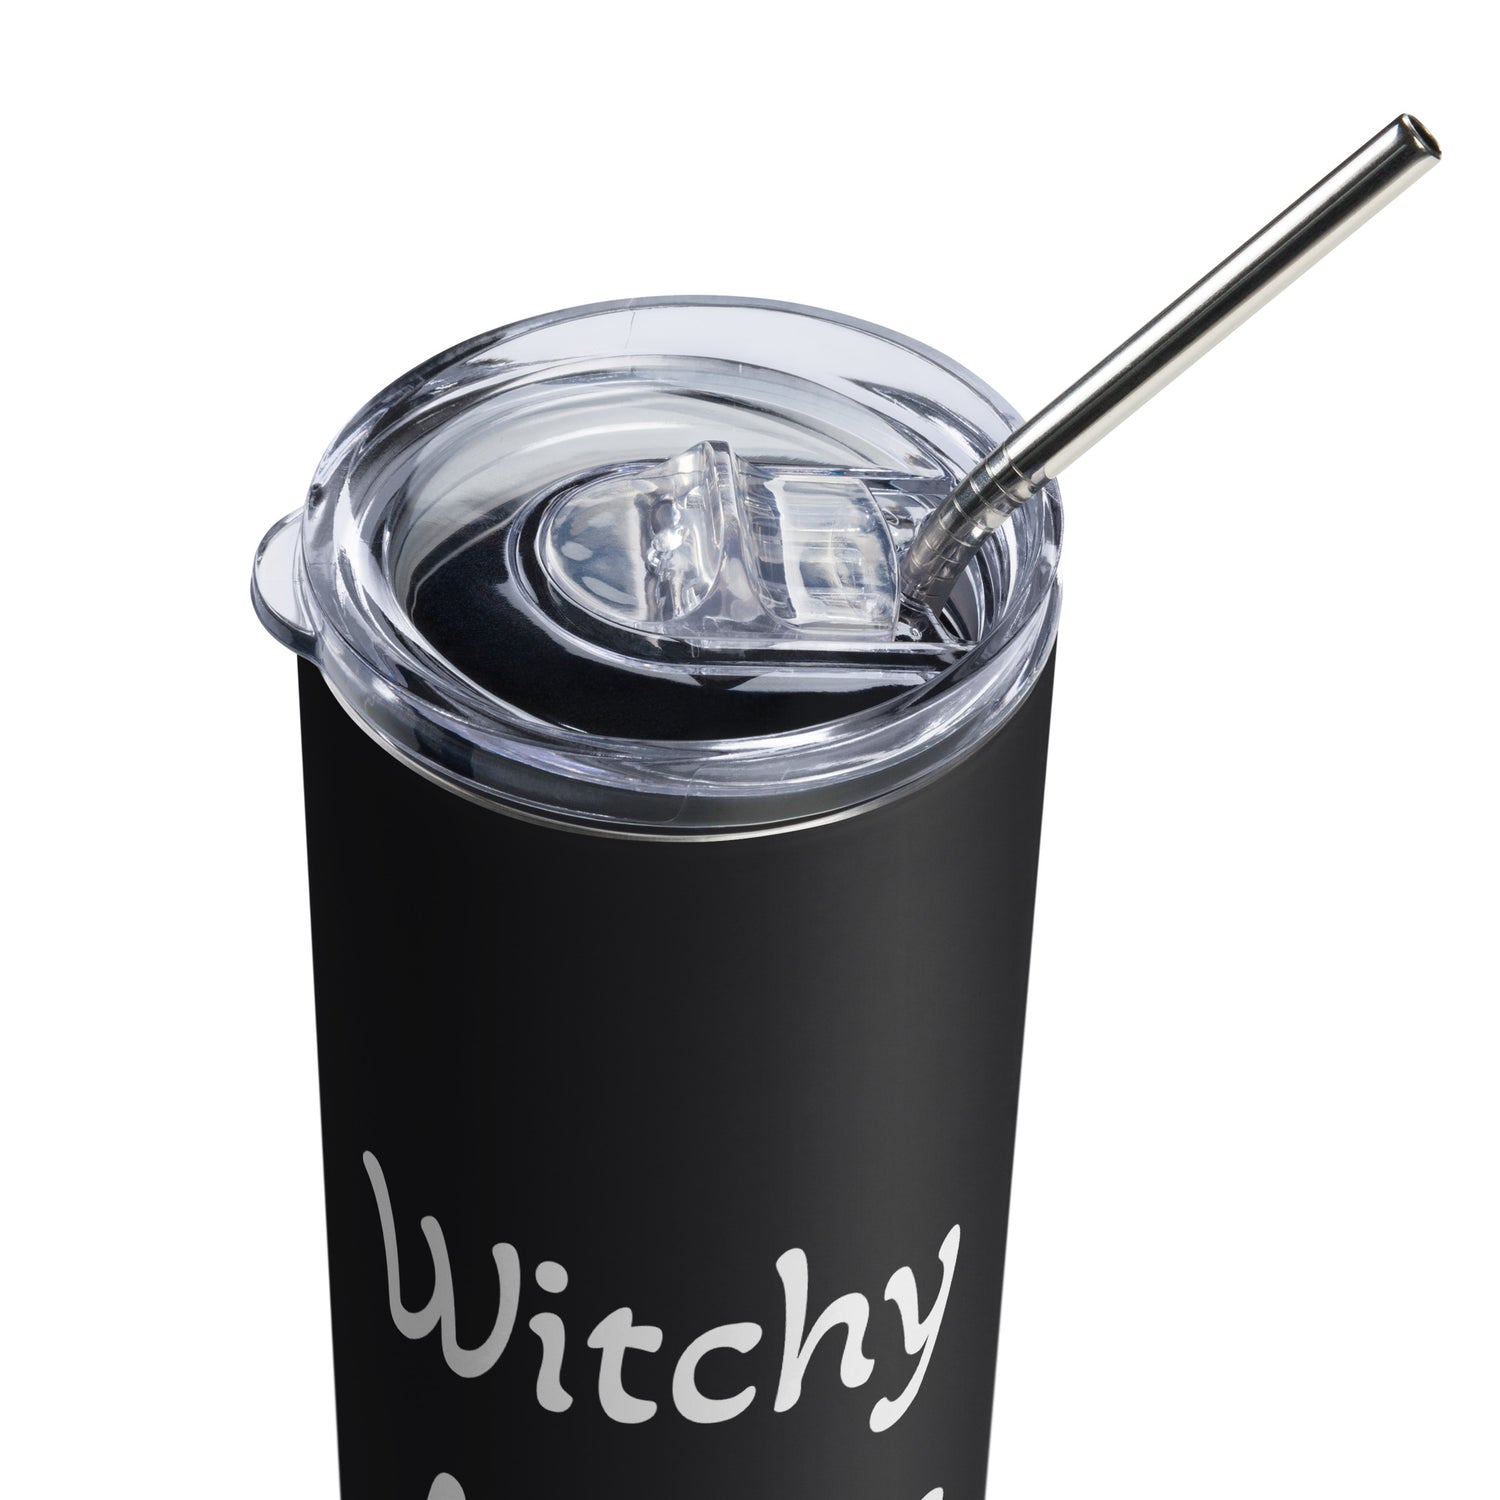 Witchy MaMa Stainless steel tumbler - Witchy Kitchens